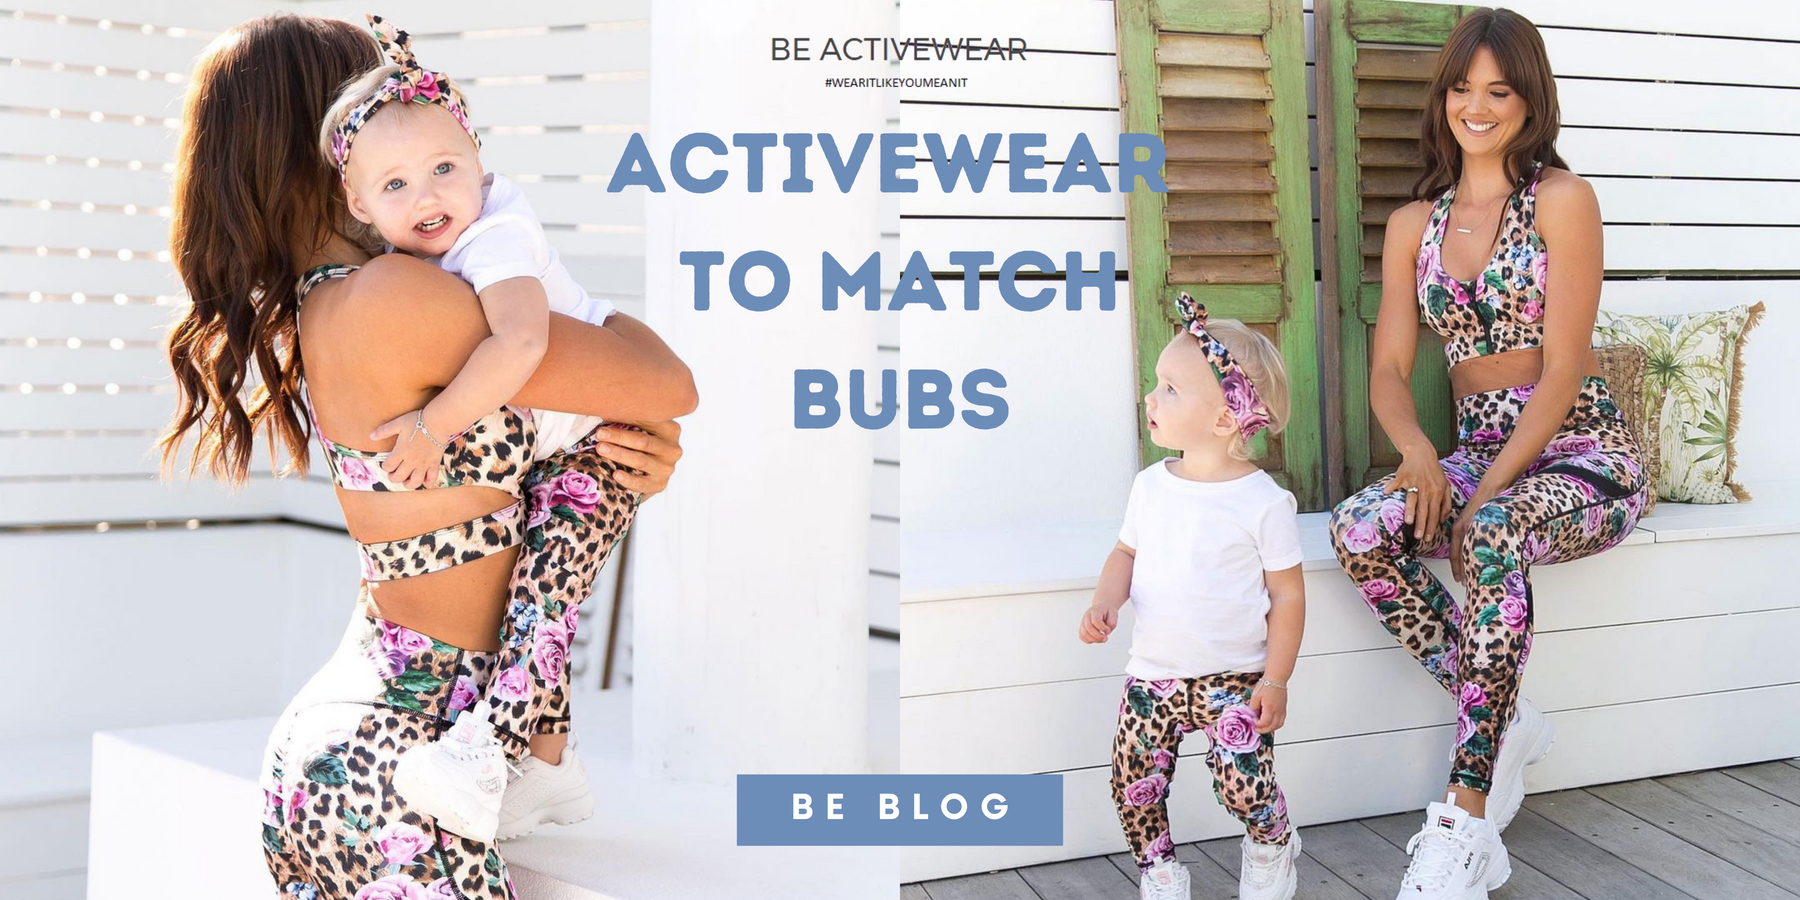 Activewear To Match Bubs